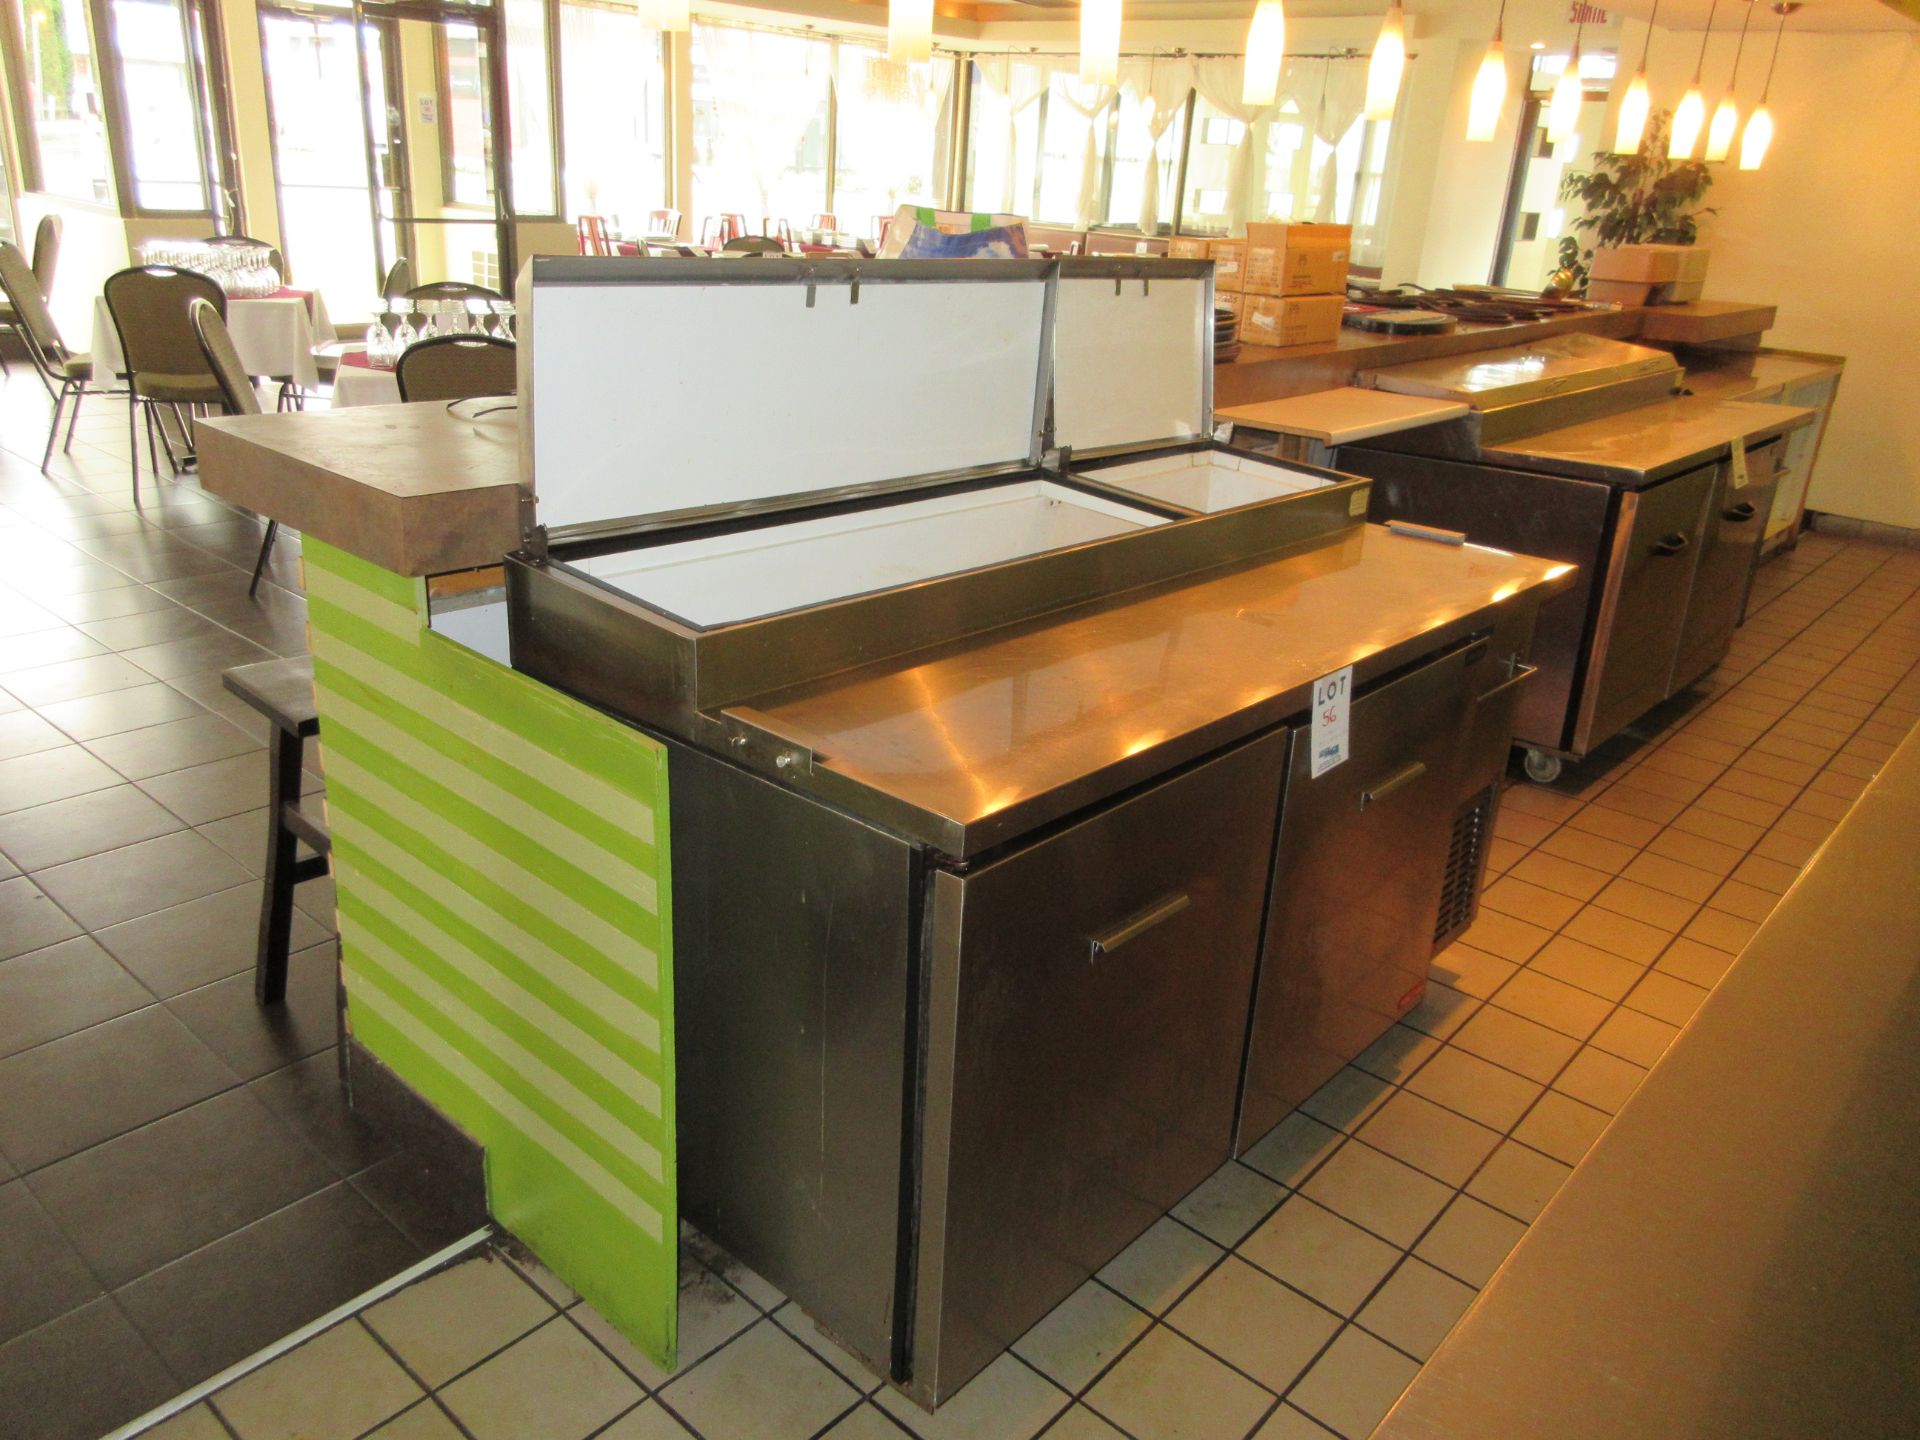 1 ''PROTEC'' STAINLESS STEEL 2 DOOR REFRIGERATED PREPERATION TABLE WITH INTEGRATED COMPRESSOS 67'' - Image 2 of 3